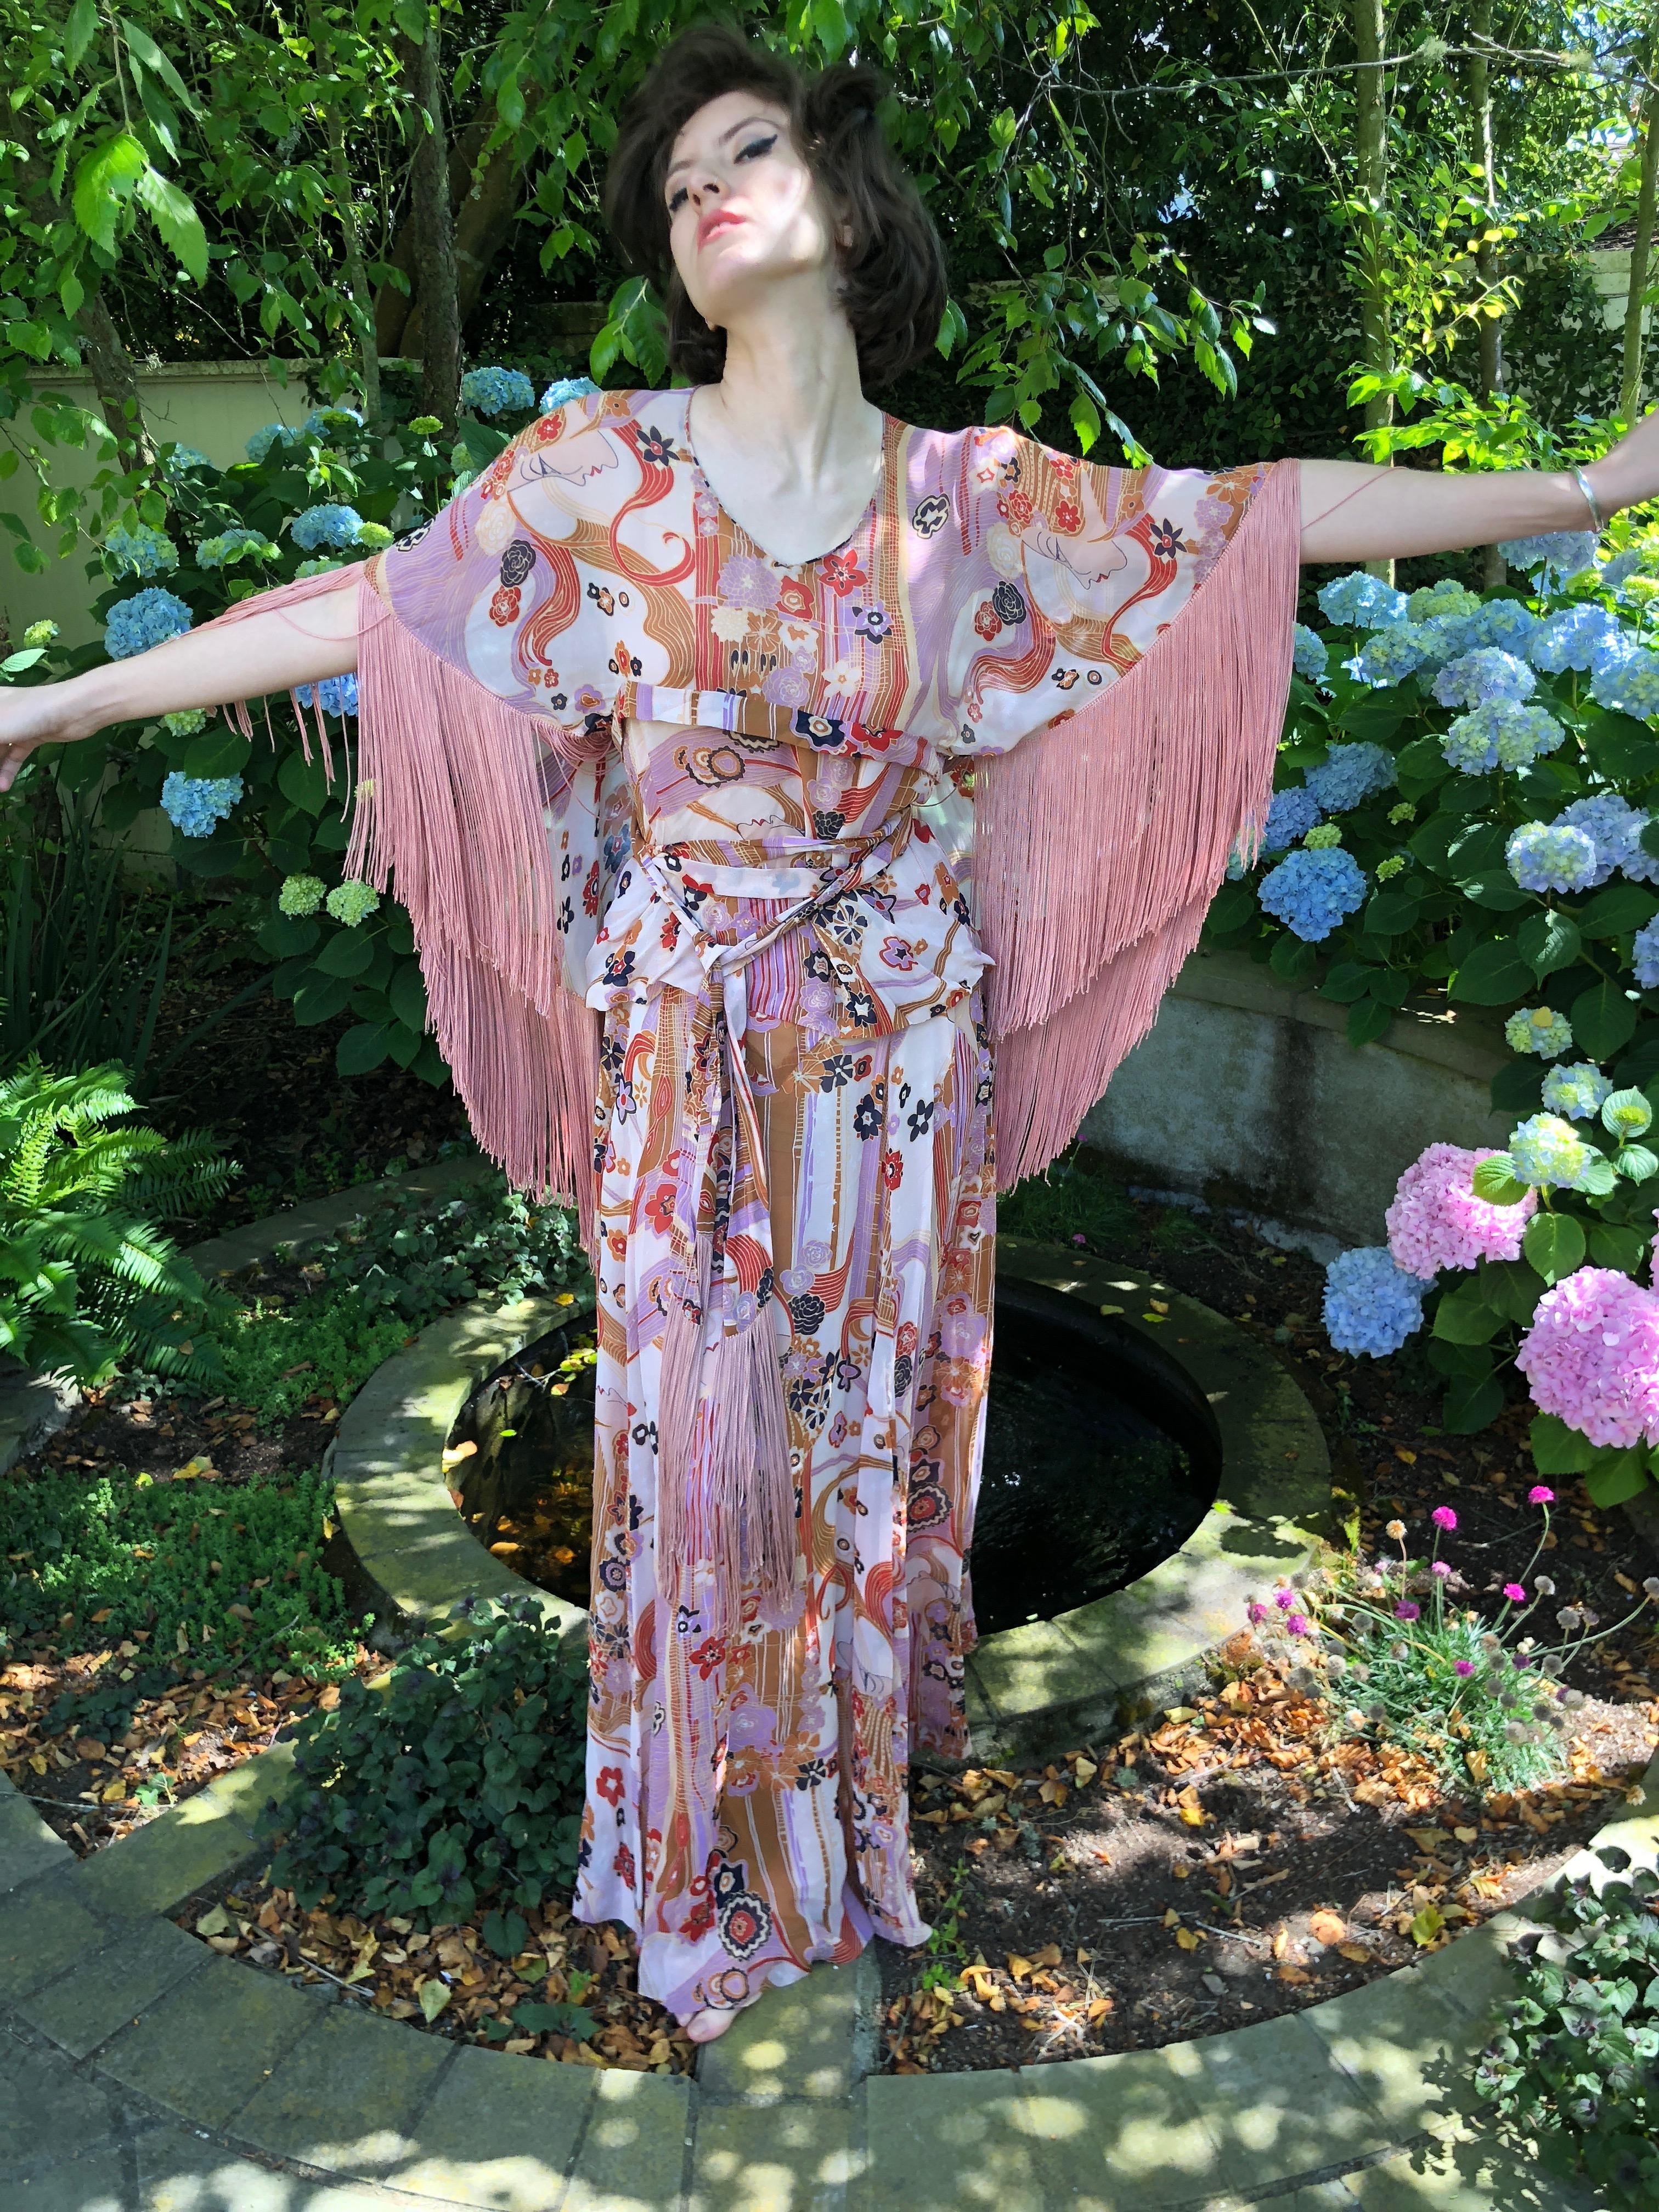 Cardinali 1970's  Ruffle Silk Hippie Print Fringed Evening Dress Ensemble.
Featuring a skirt and a wrap style top with fringe, so groovy.

From the Archive of Marilyn Lewis, the creator of Cardinali
Cardinali was founded in Los Angeles in 1970, by